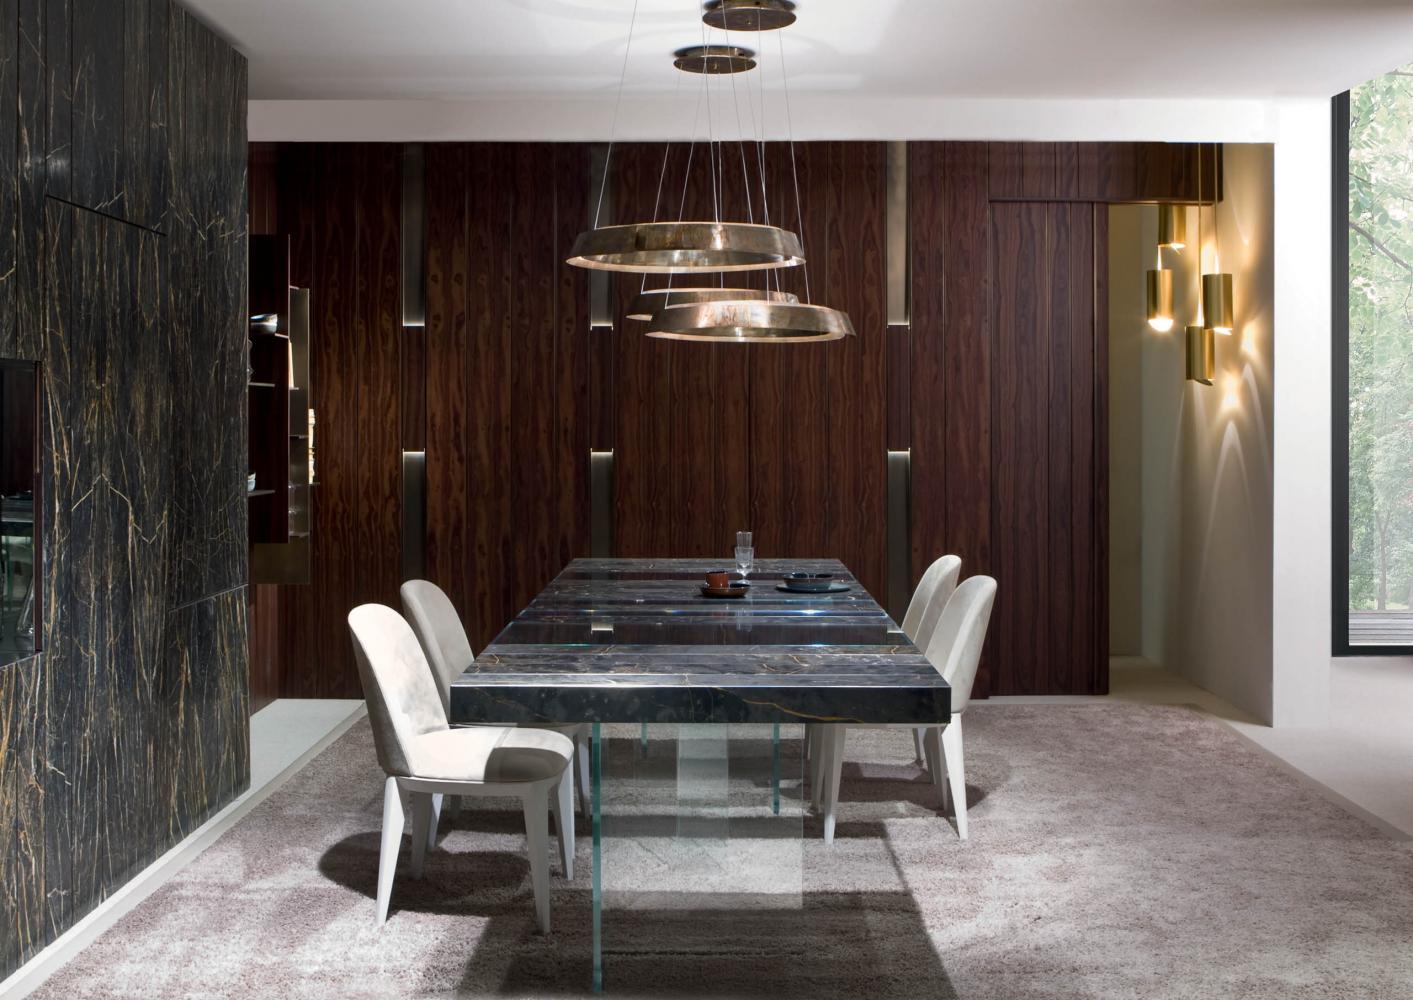 Laurameroni luxury modern made to measure bespoke freestanding furniture for contemporary interior decor and design